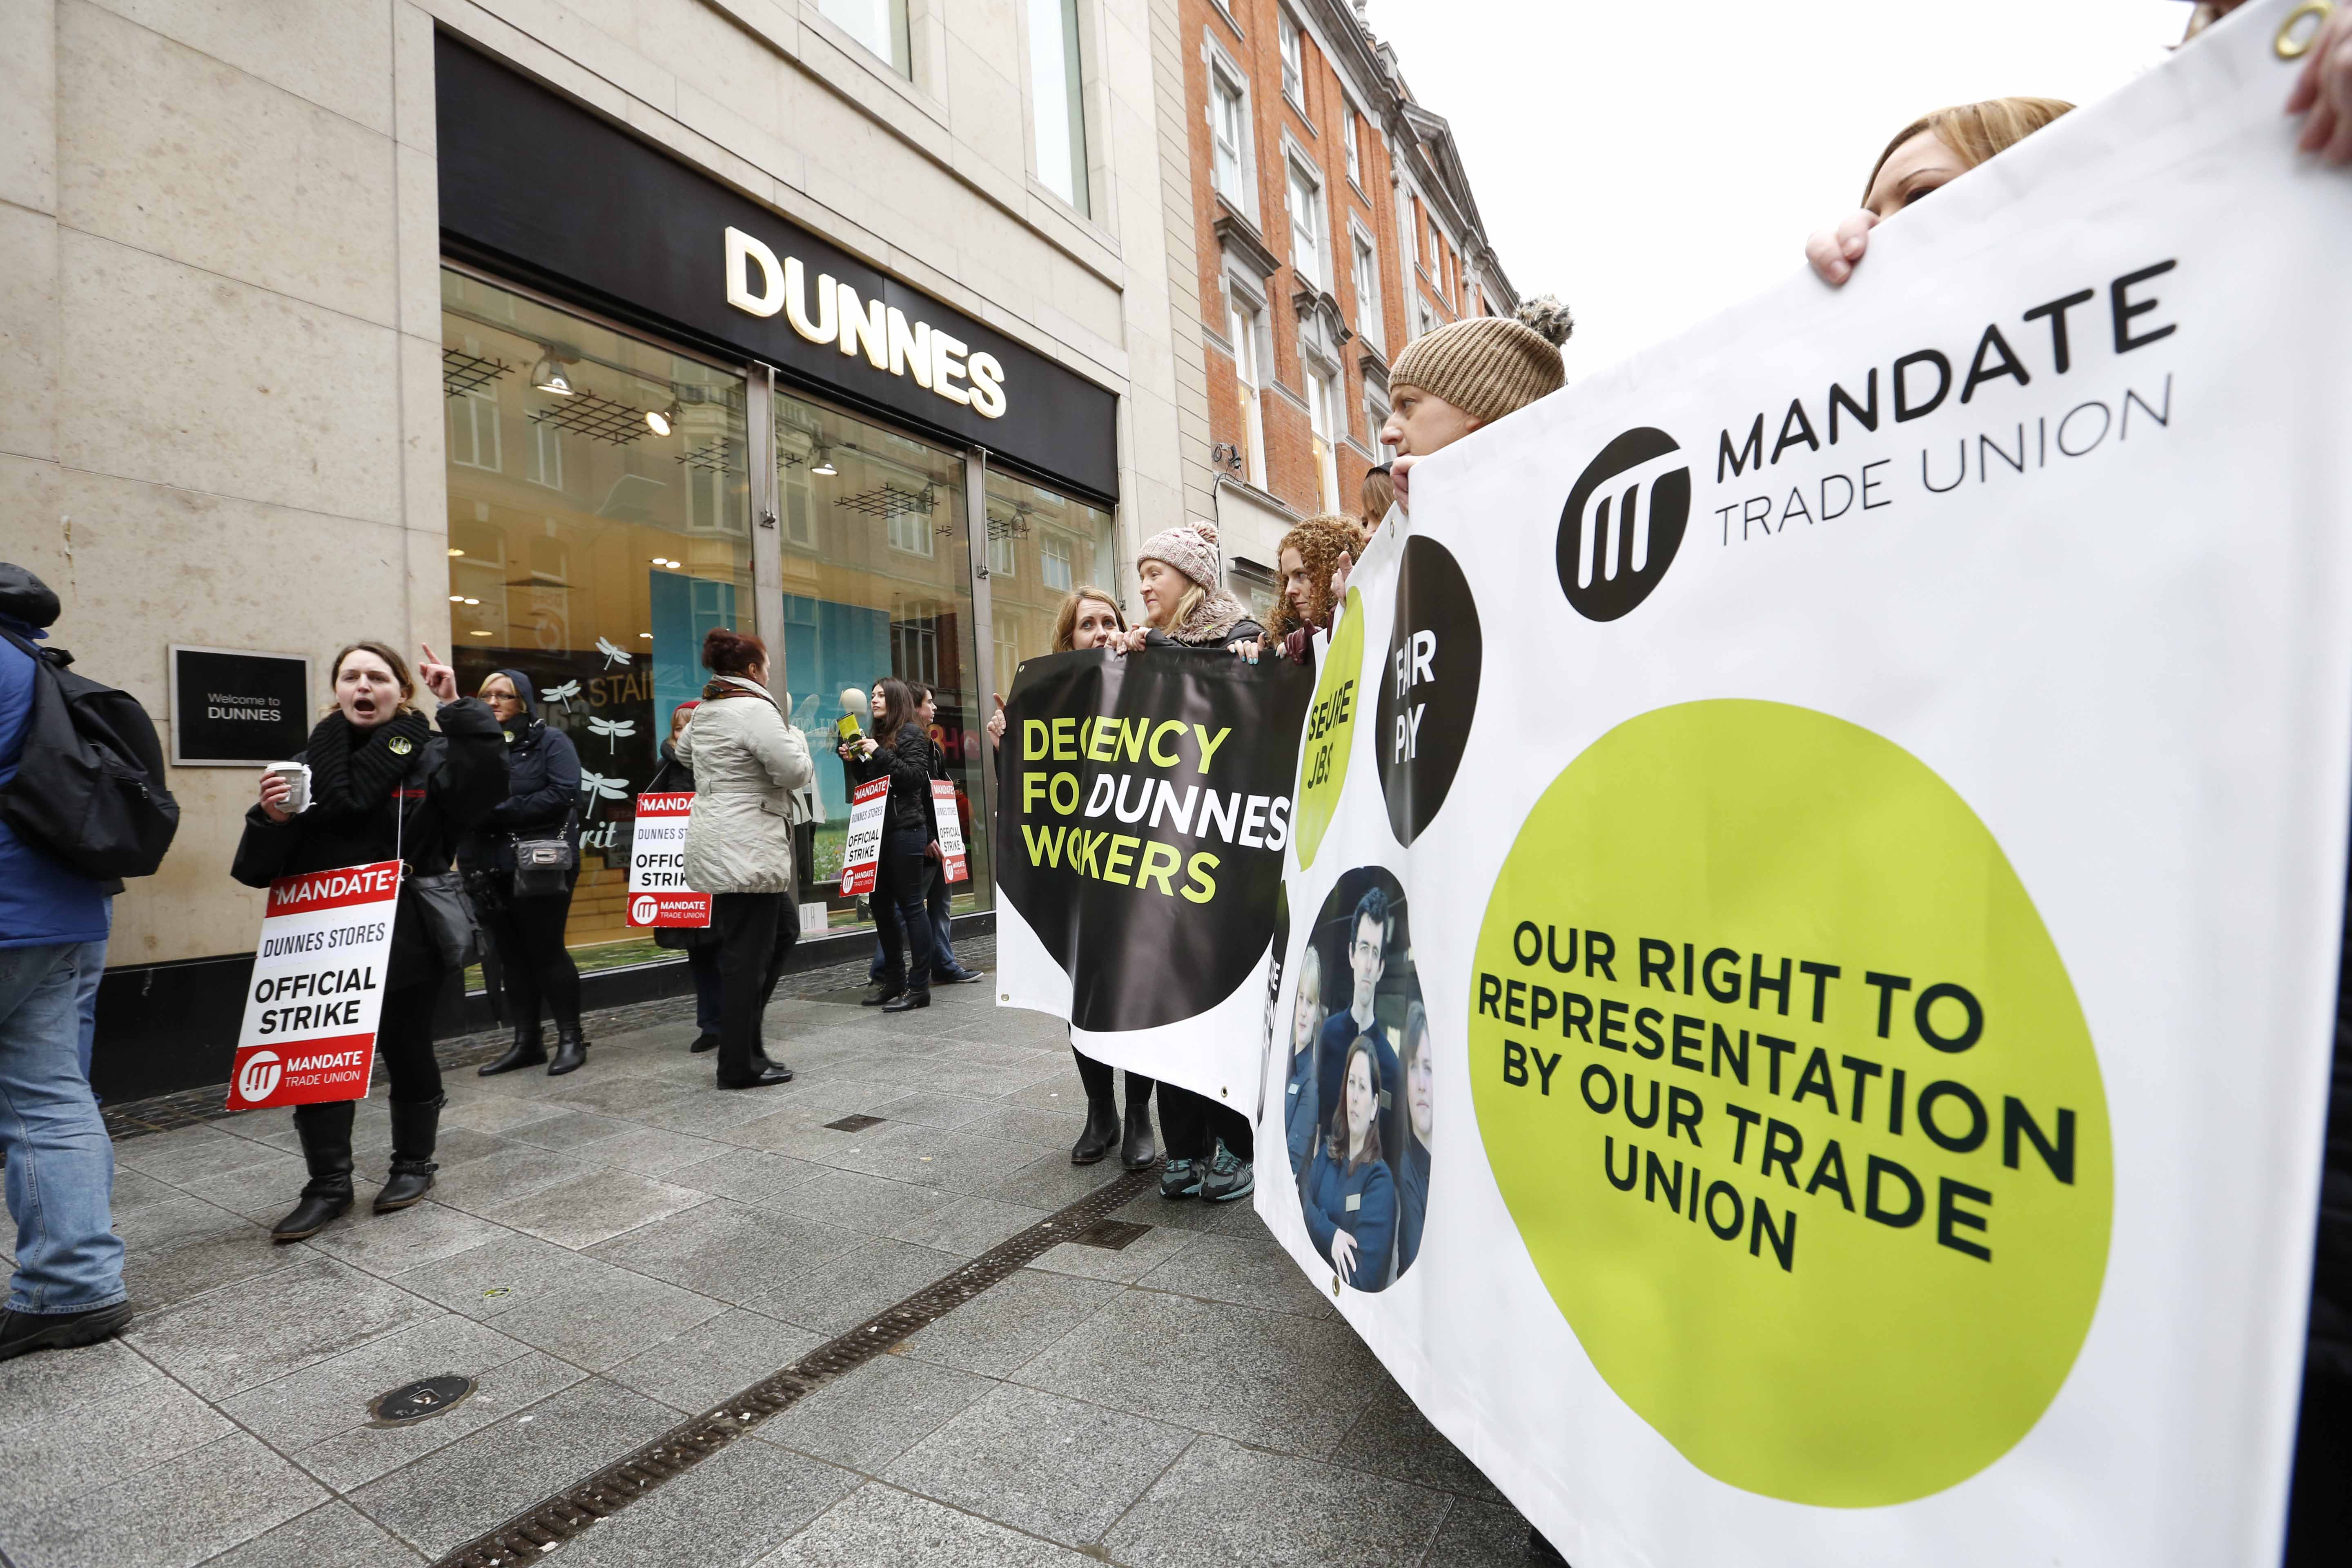 Mandate says that Dunnes is blatantly targeting certain staff with the hope of intimidating them